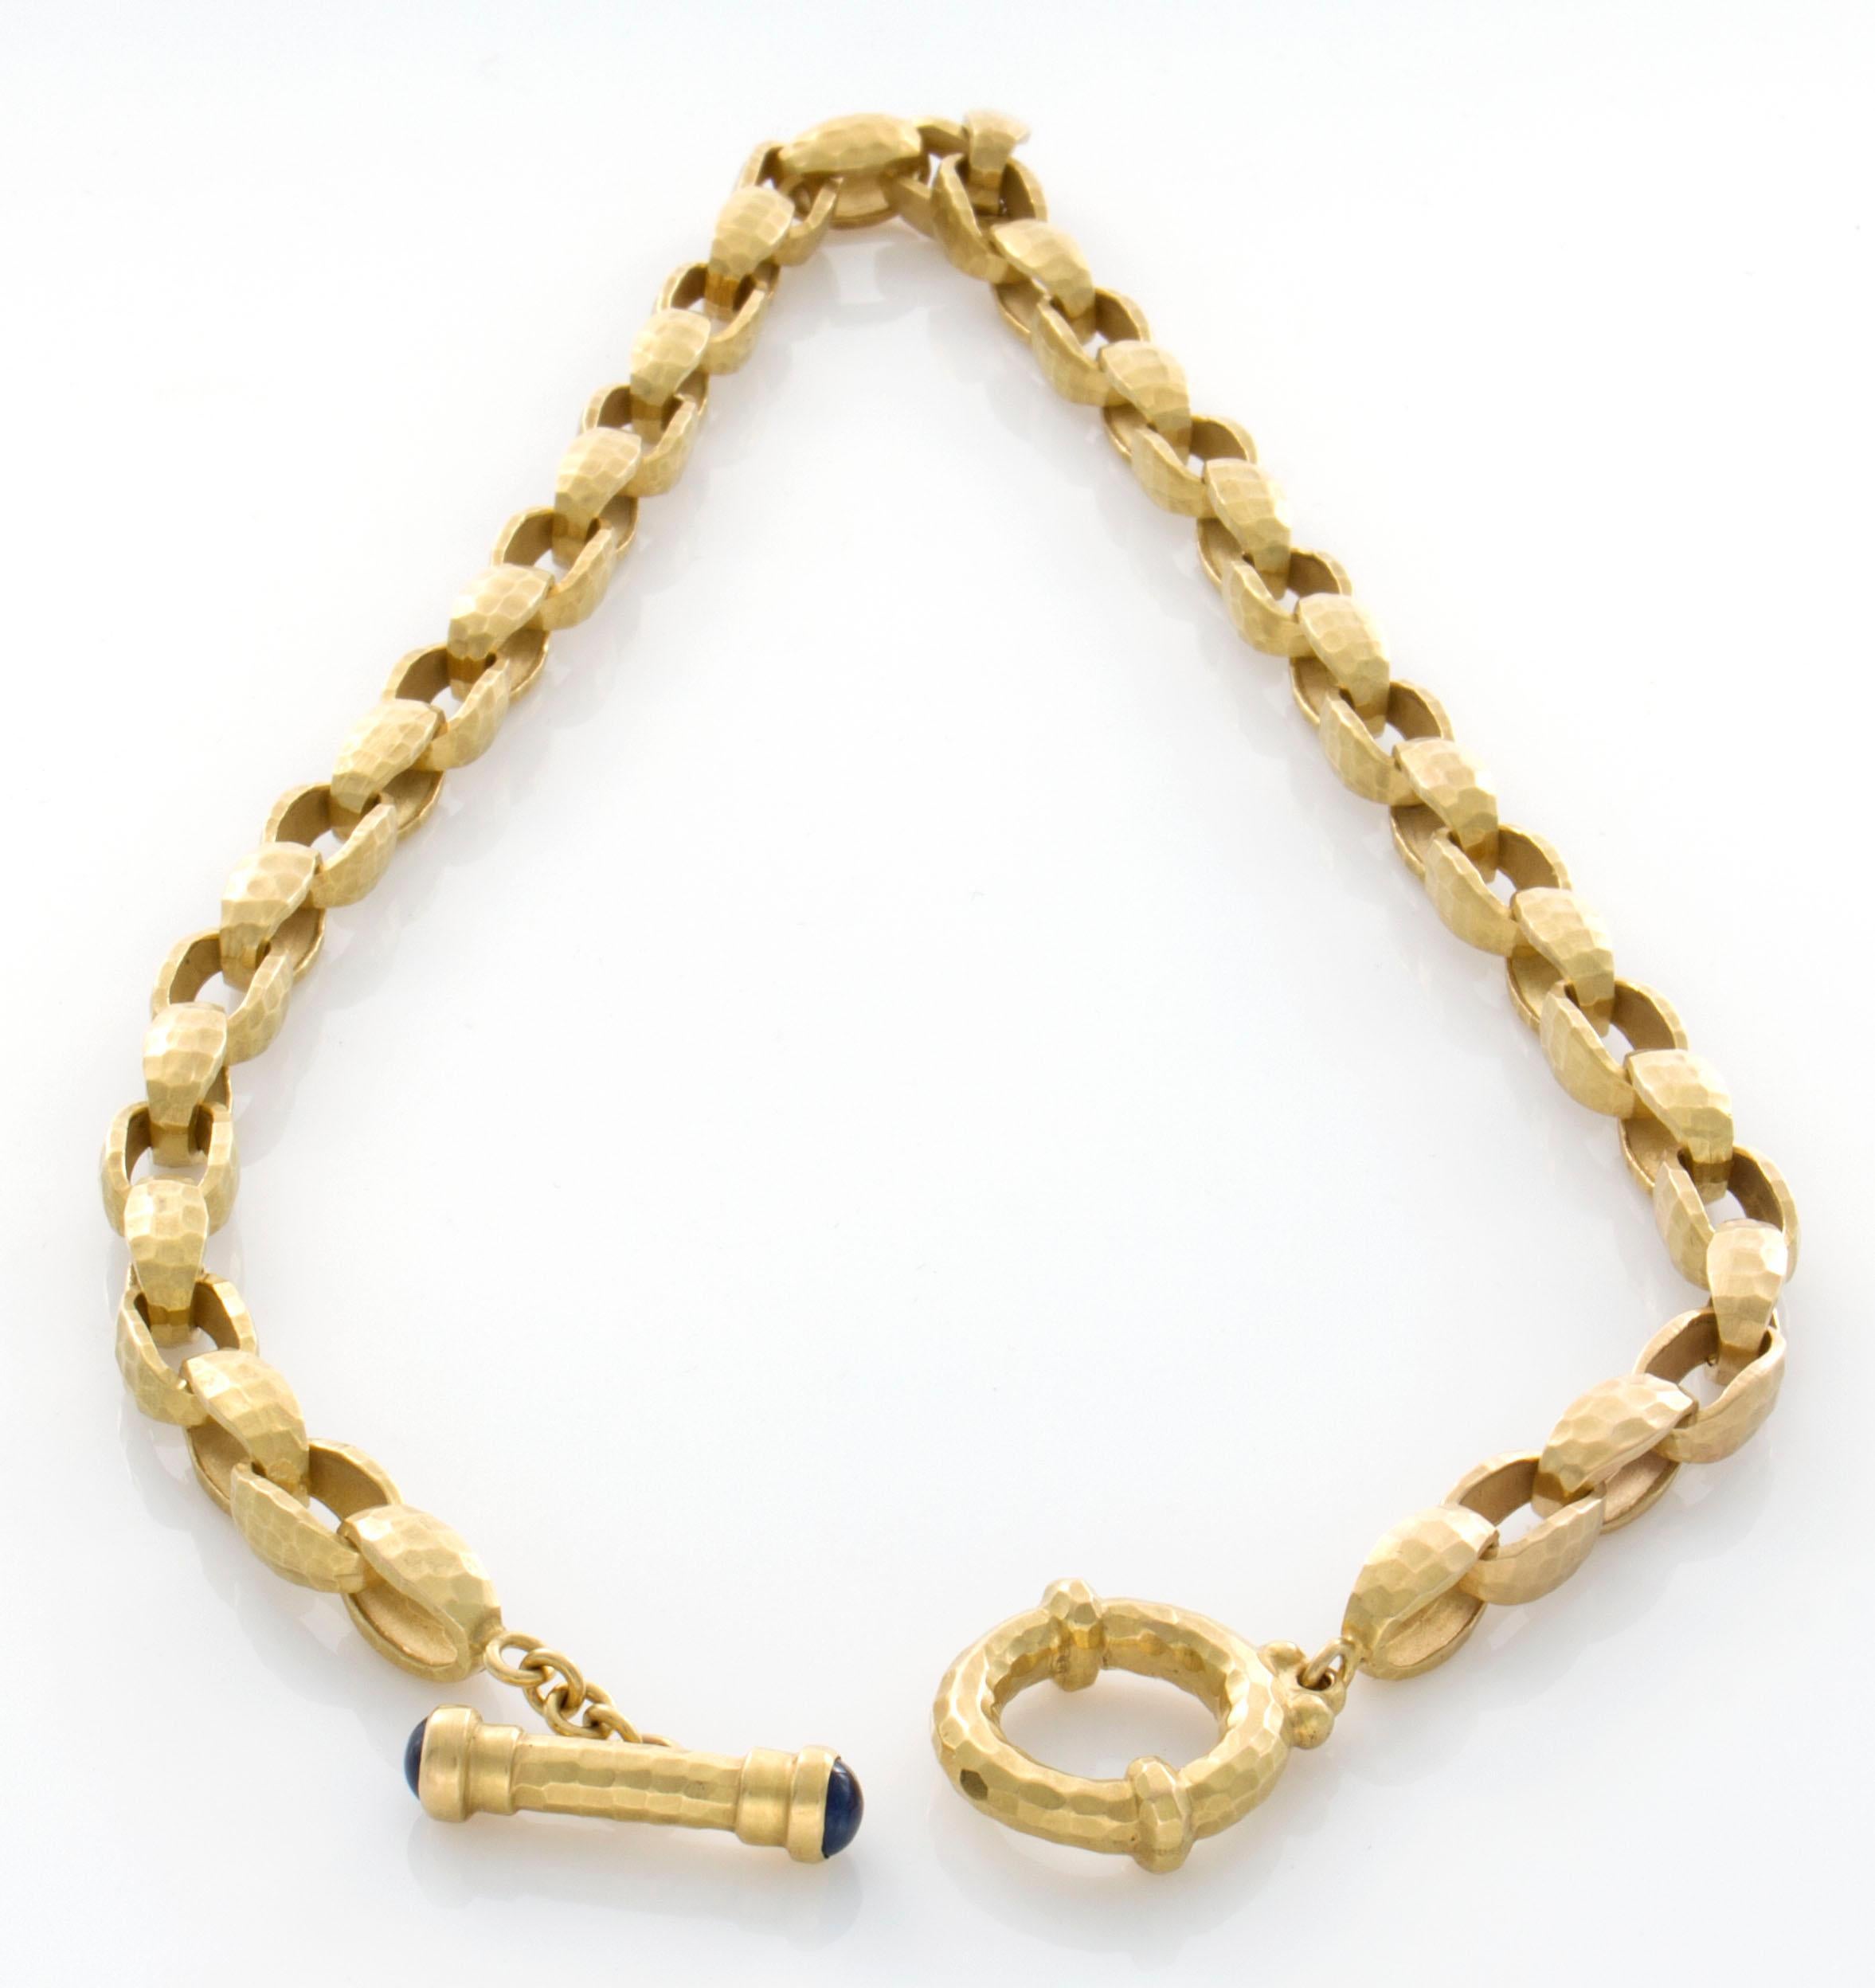 Modern 14 Karat Solid Yellow Gold Hammered Link Necklace with Sapphire Toggle Clasp For Sale